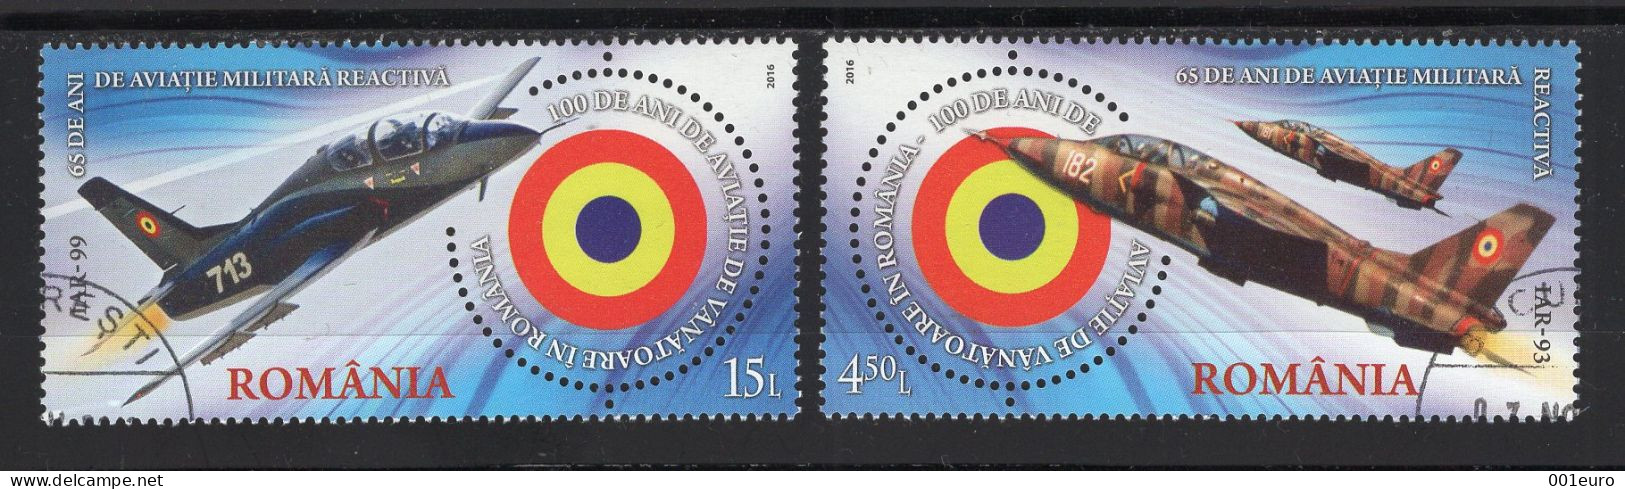 ROMANIA 2016: ROMANIAN AIR FORCE FIGHTER JETS, 2 Used Stamps - Registered Shipping! - Oblitérés